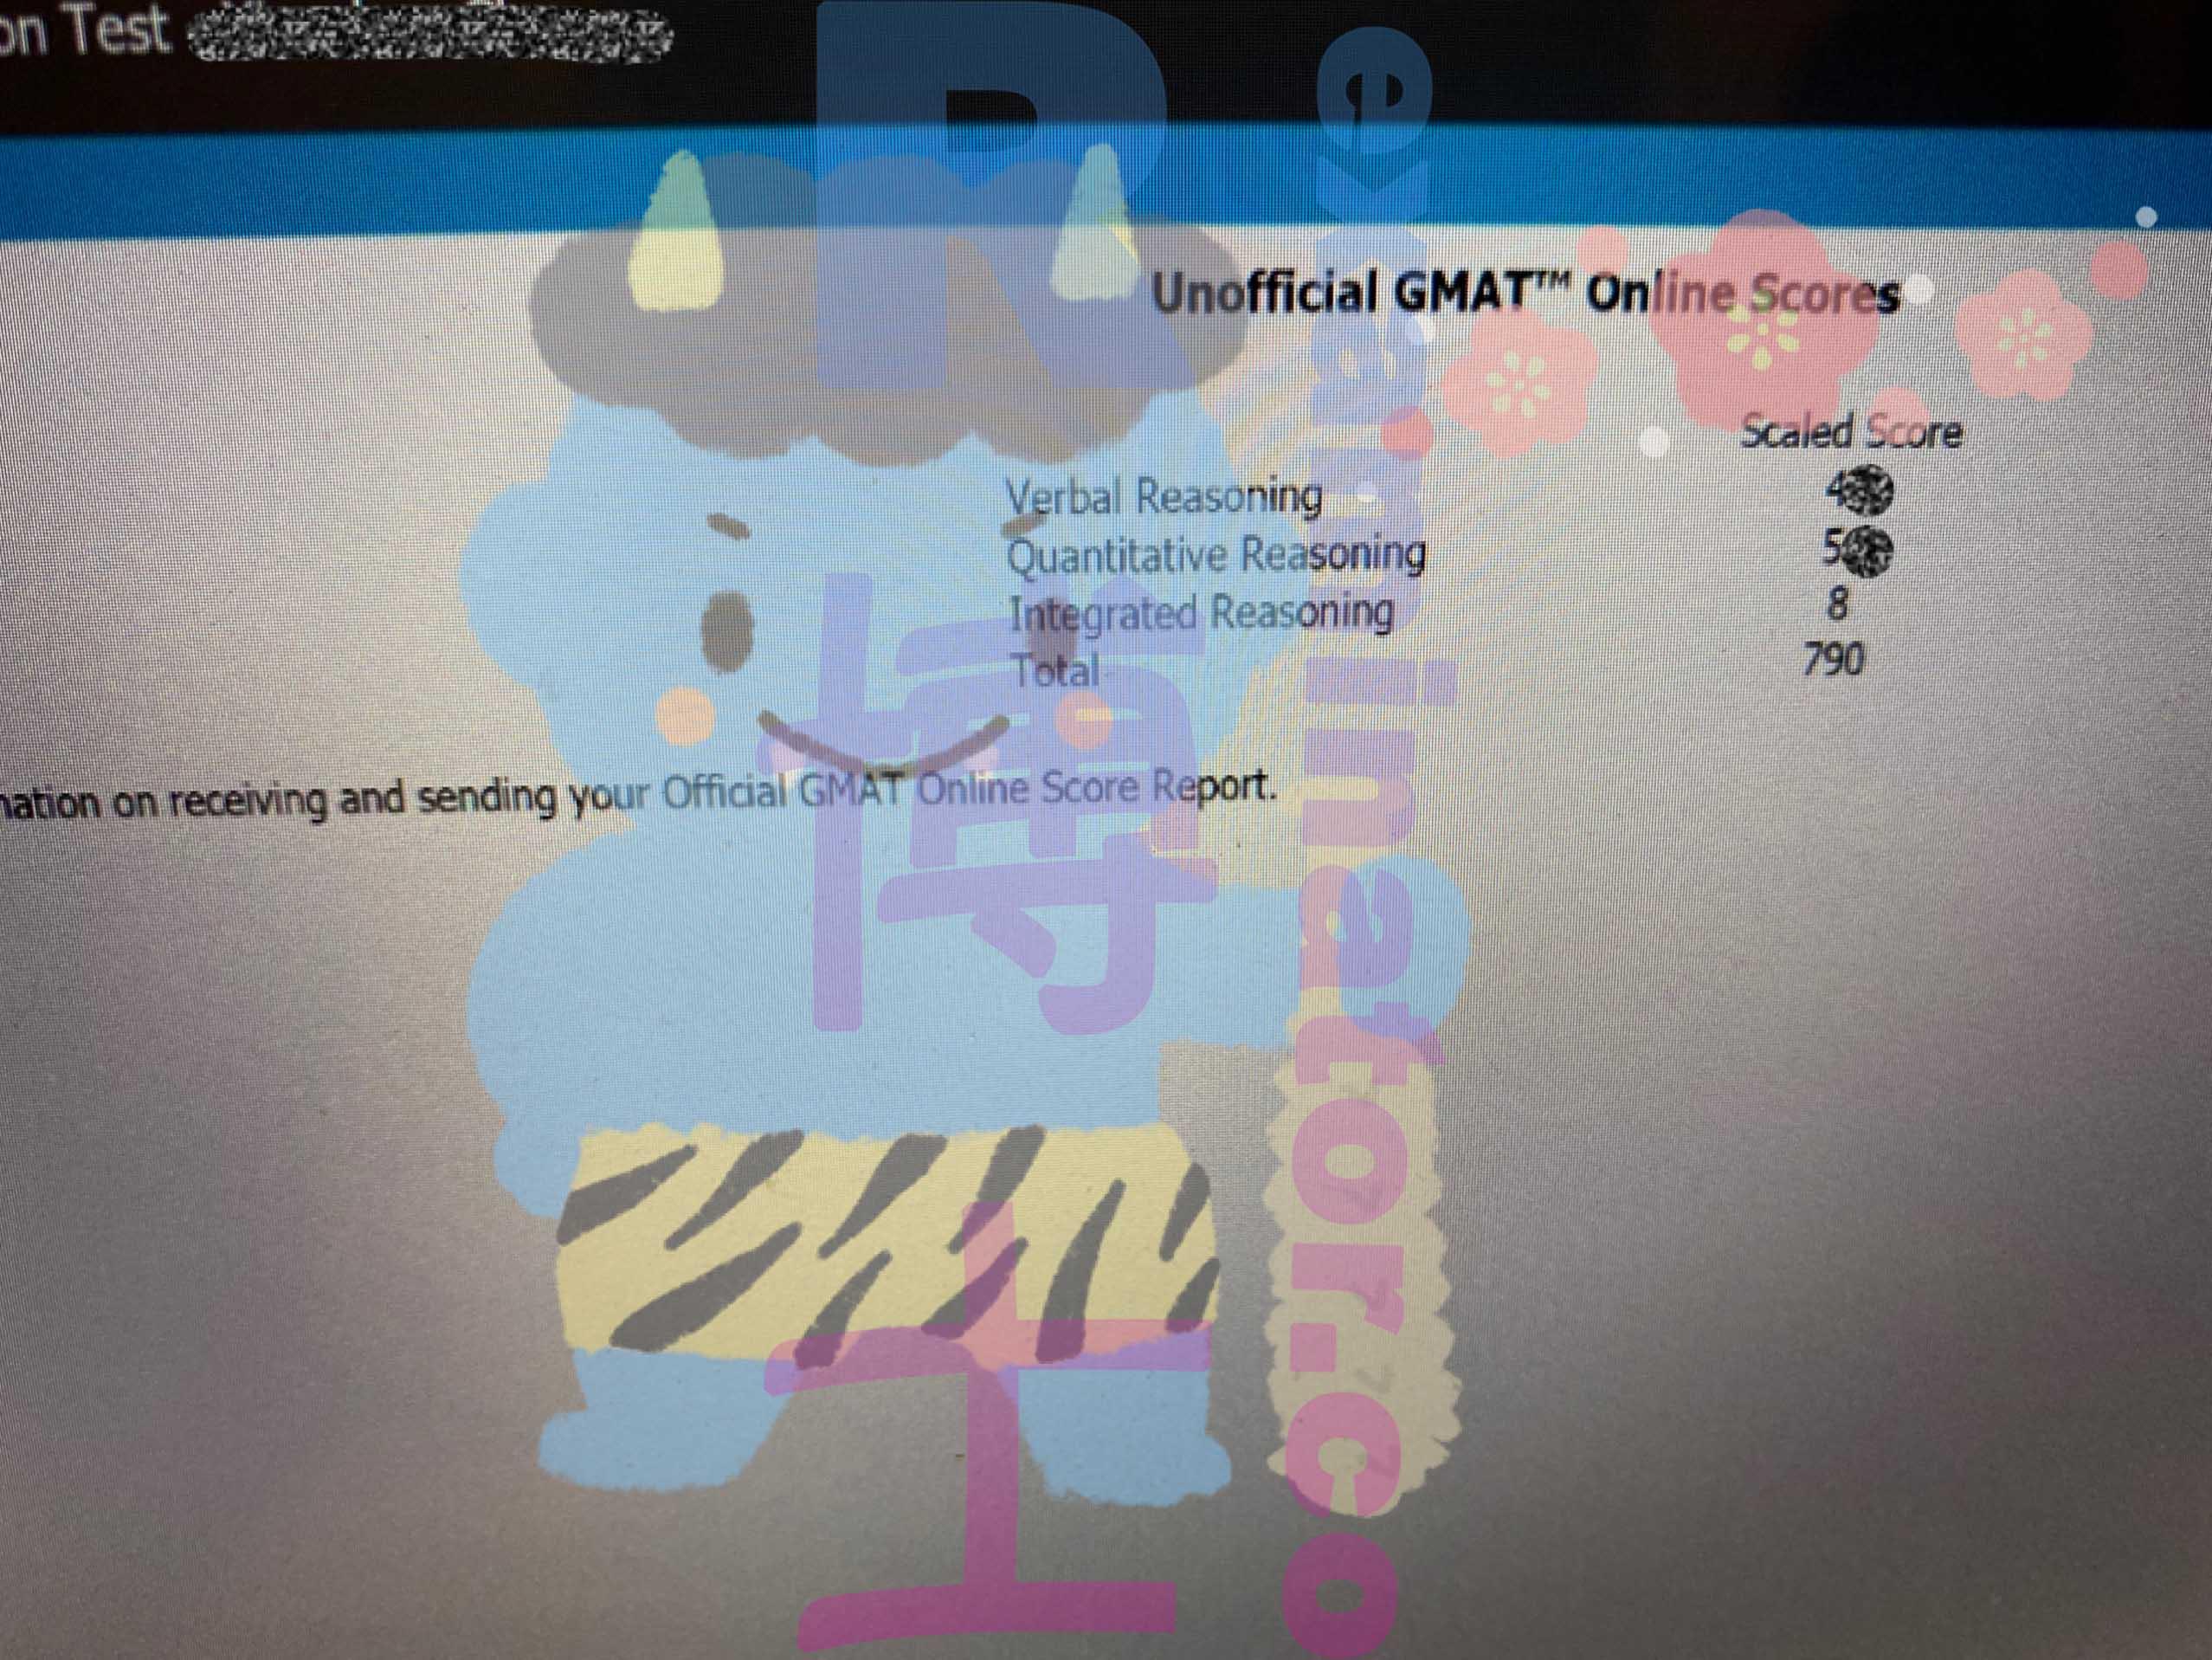 score image for GMAT Cheating success story #275